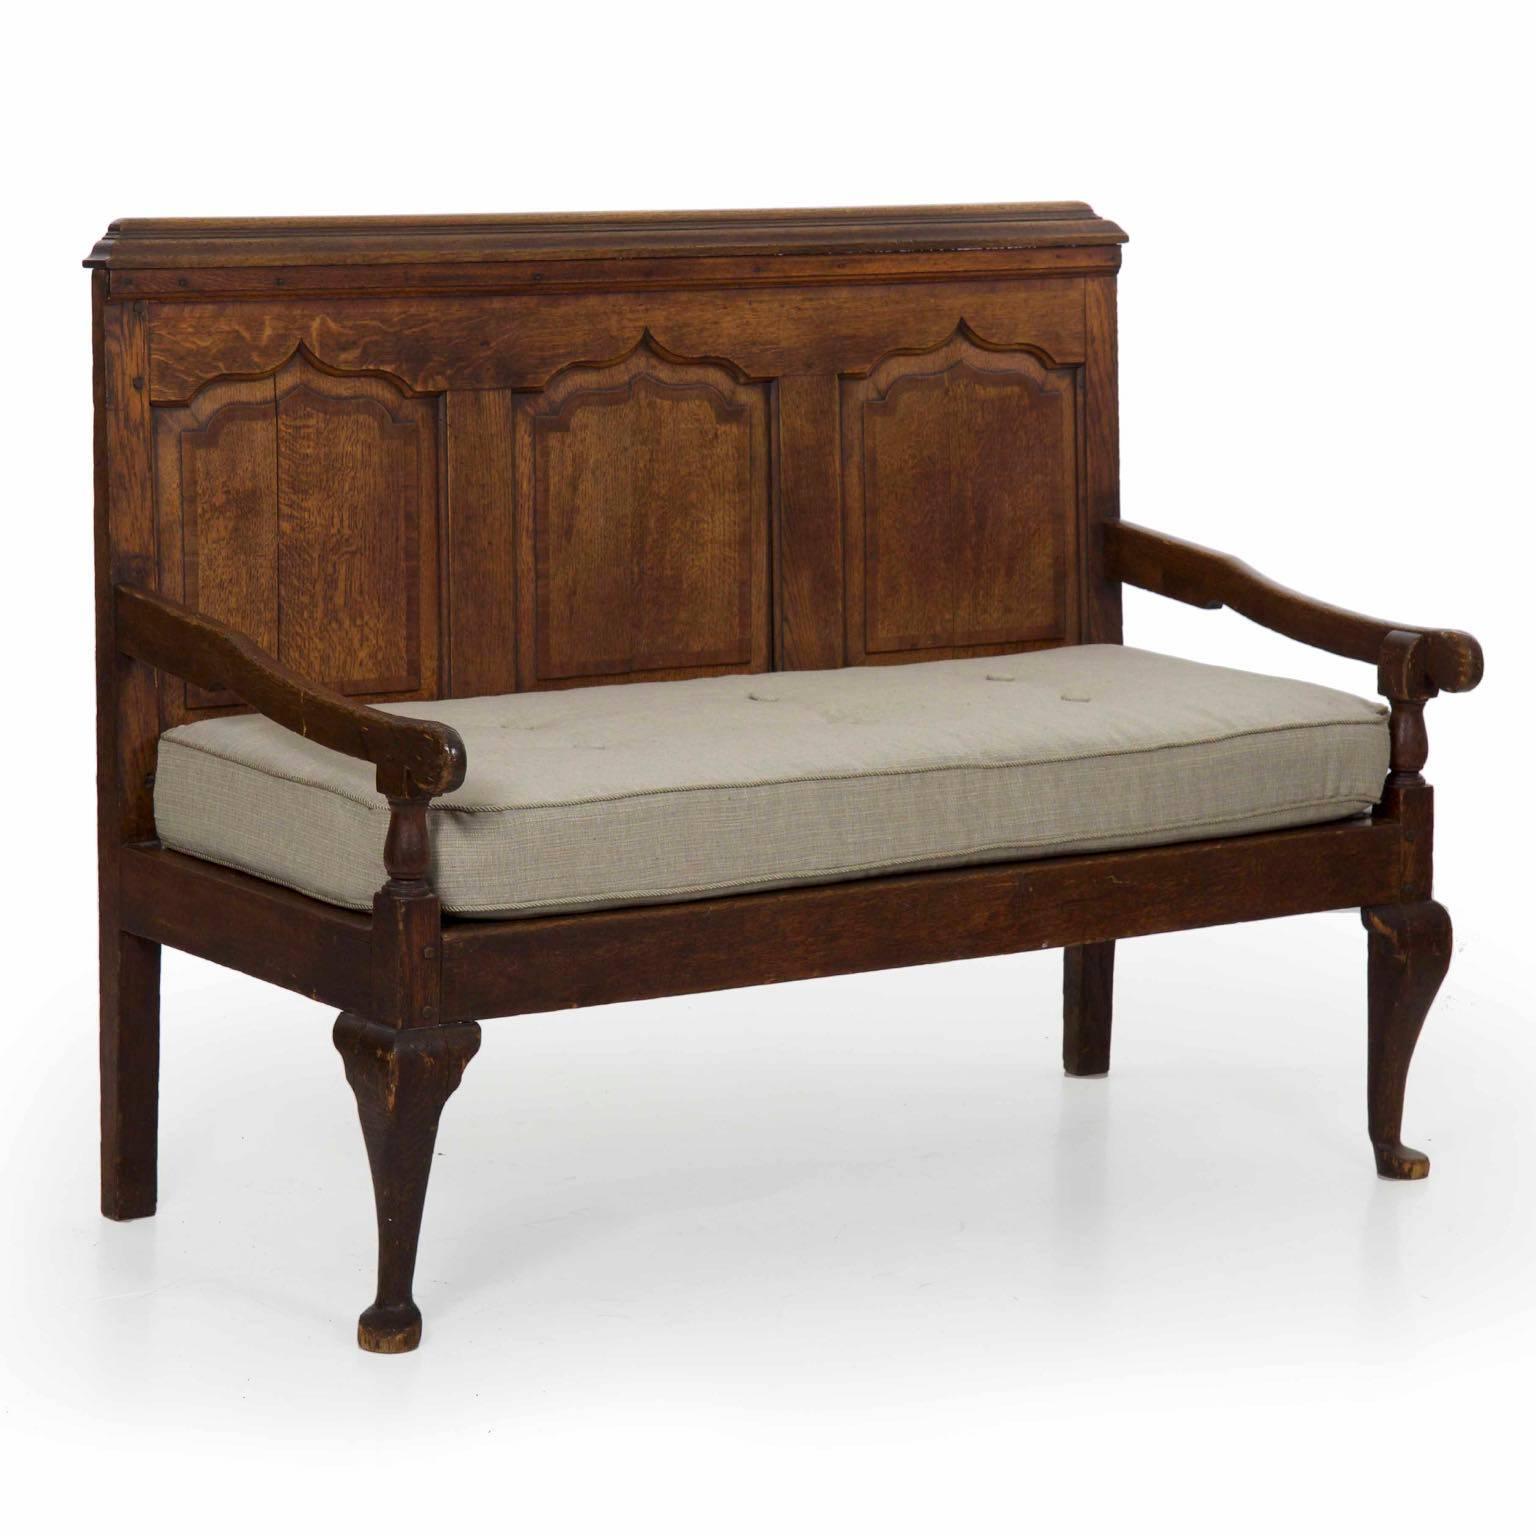 A gorgeous worn antique English hall settle, this antique wooden bench is beautifully formed with arched recessed oak panels in the Gothic taste. The tenon-mortise construction brings strength and longevity to the form, the thick and generous solid